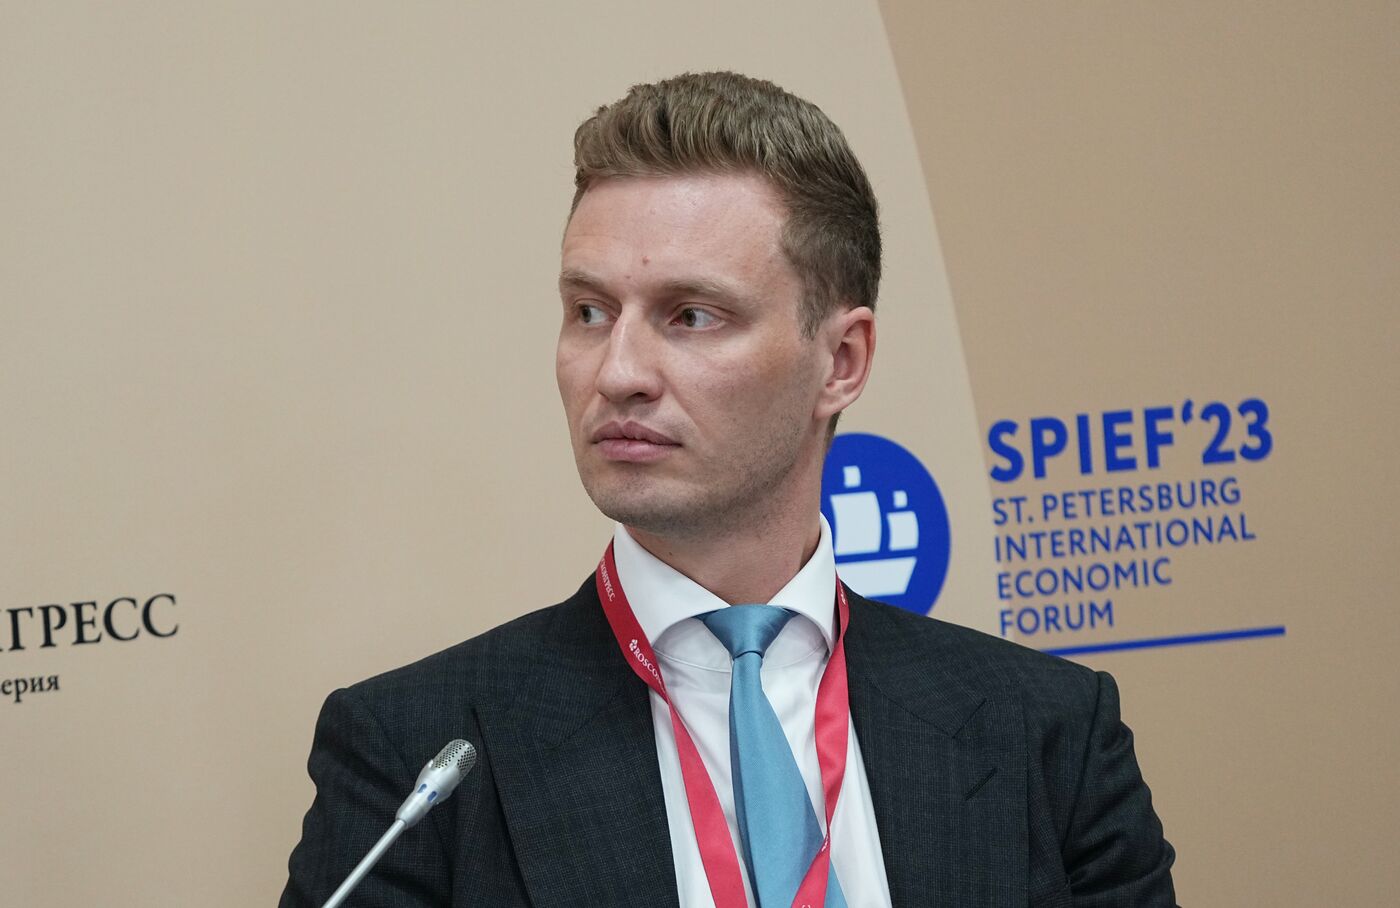 SPIEF-2023. Focus on Creativity: Creative Industries' New Sources of Investment